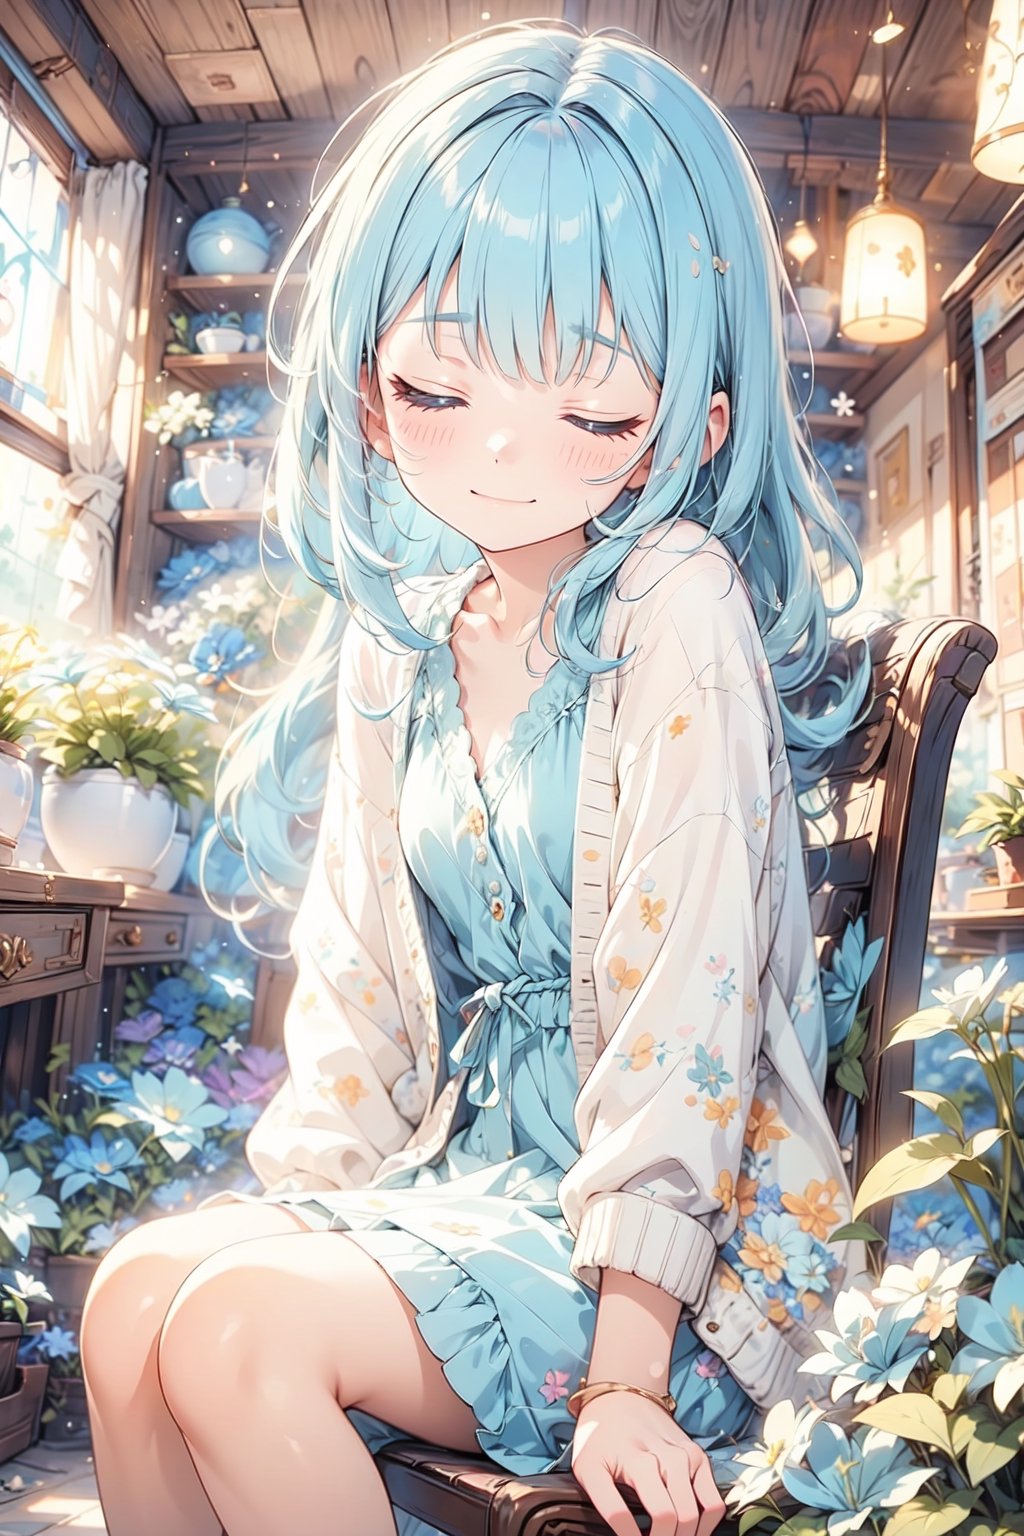 masterpiece, best quality, extremely detailed, (illustration, official art:1.1), 1 girl ,(((( light blue long hair)))), light blue hair, ,10 years old, long hair ((blush)) , cute face, big eyes, masterpiece, best quality,(((((a very delicate and beautiful girl))))),Amazing,beautiful detailed eyes,blunt bangs((((little delicate girl)))),tareme(true beautiful:1.2), sense of depth,dynamic angle,,,, affectionate smile, (true beautiful:1.2),,(tiny 1girl model:1.2),)(flat chest)),(Master photography:1.4),(Beautiful and delicate girl:1.2),green light, tranquil, no lineart, Maya Hotel, abandoned room, big windows, leaves are falling, 1gitl sitting on wooden chair, light blue hair and white dress, closed eyes,(sitting with one knee up:1.1), cardigan, luminous glow, mystic atmosphere, depth of field, dynamic angle, light particle effect, light leaks, aerial effect, blue flowers,look into viewers, look into viewers,(sitting with one knee up:1.1), cardigan, luminous glow, mystic atmosphere, depth of field, dynamic angle, light particle effect, light leaks, aerial effect, blue flowers,look into viewers, look into viewers ,ASU1,light